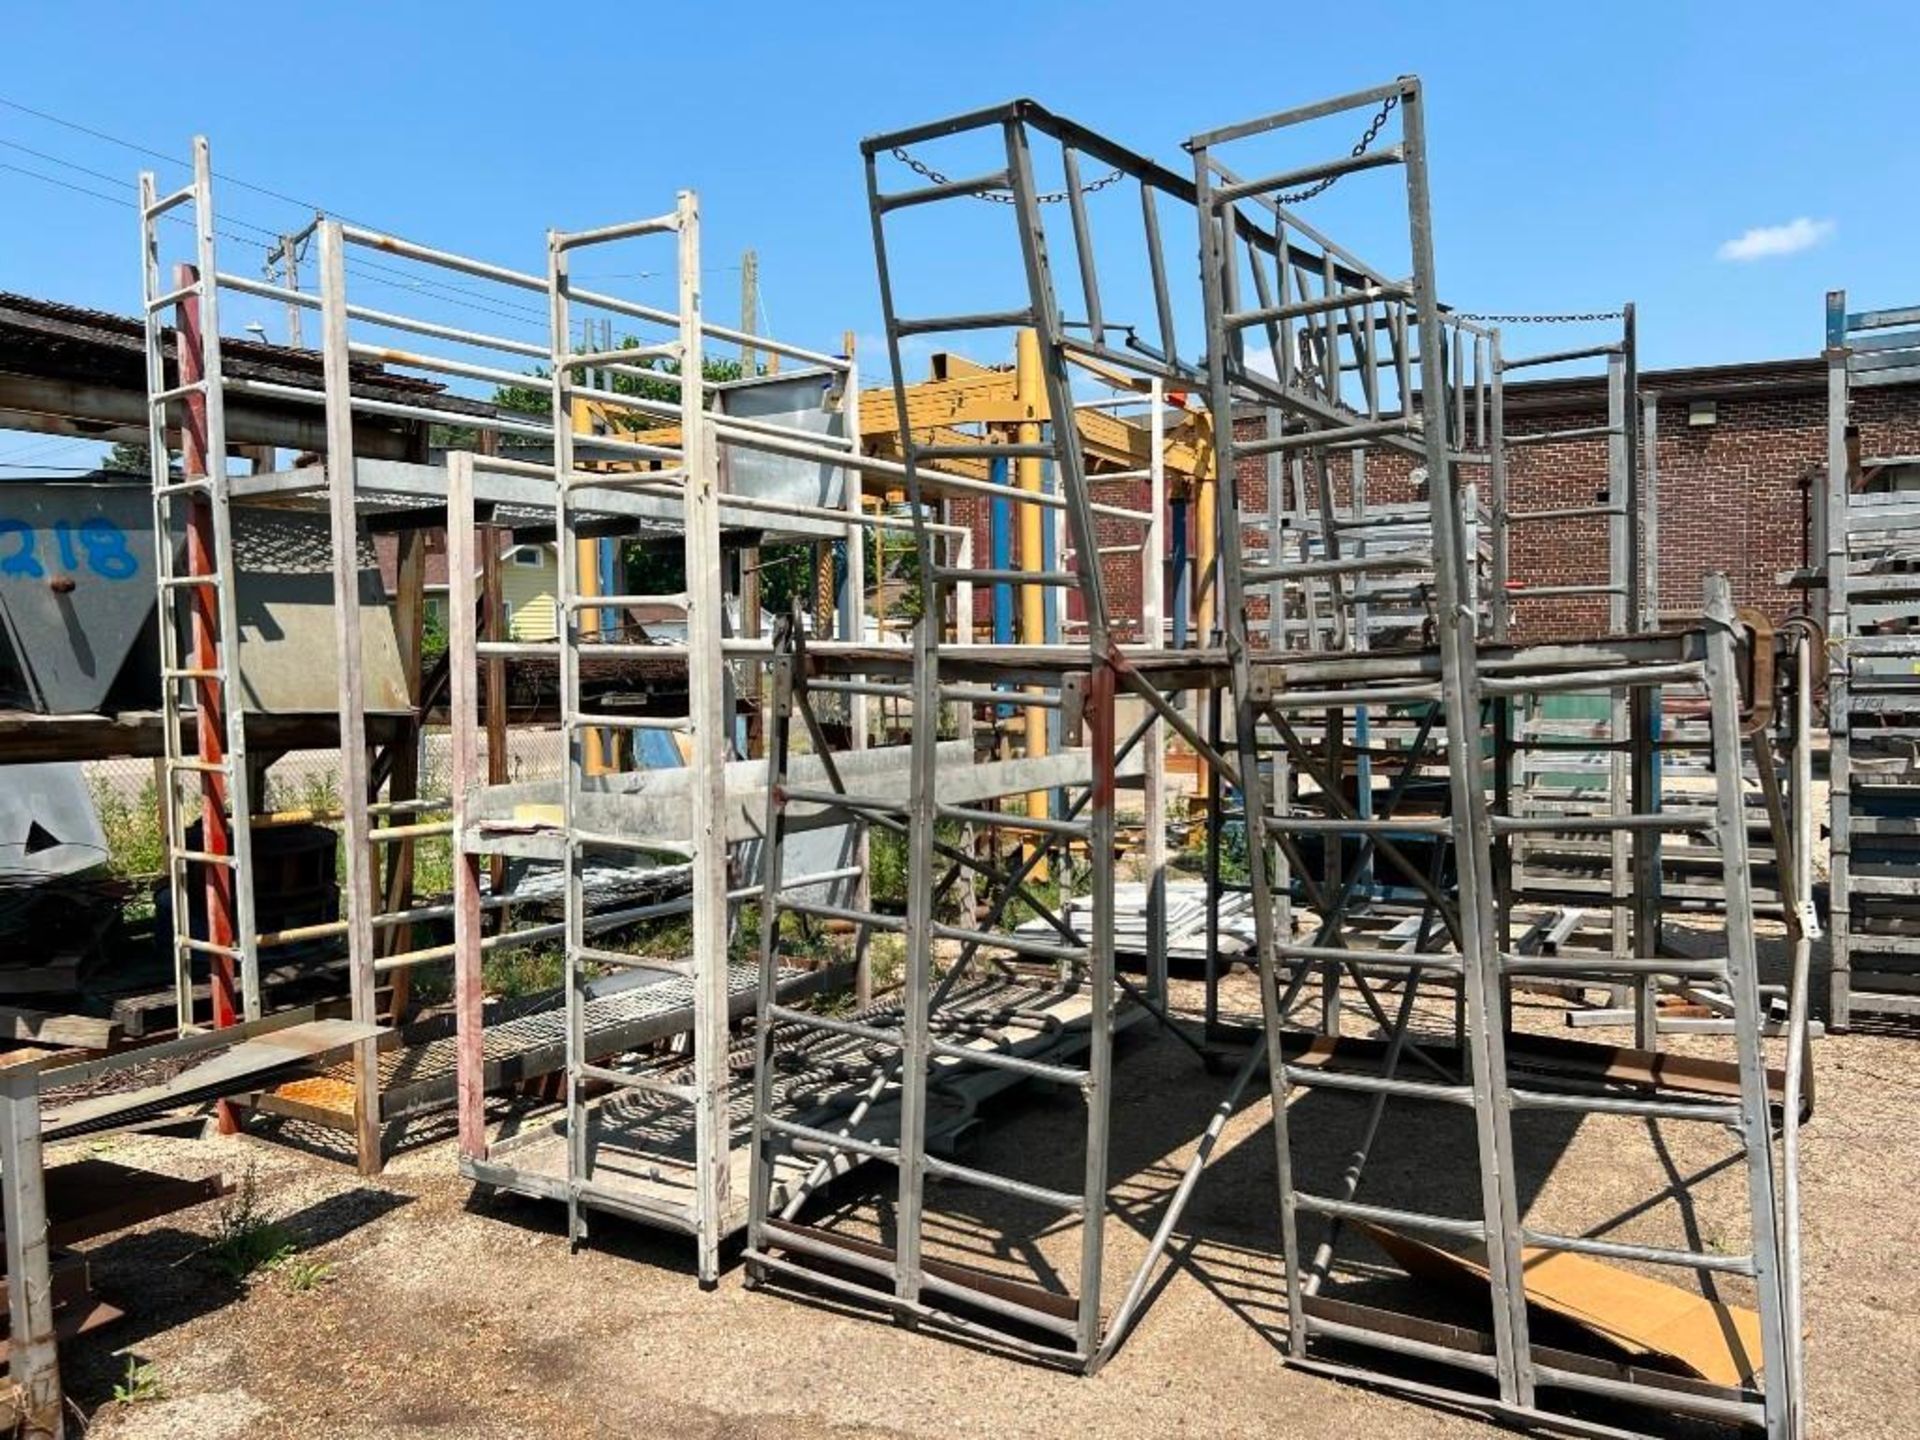 Contents of Rear Yard Including: Assorted Material Racks, Roller Conveyor, A-Frame Racks with Pipe &